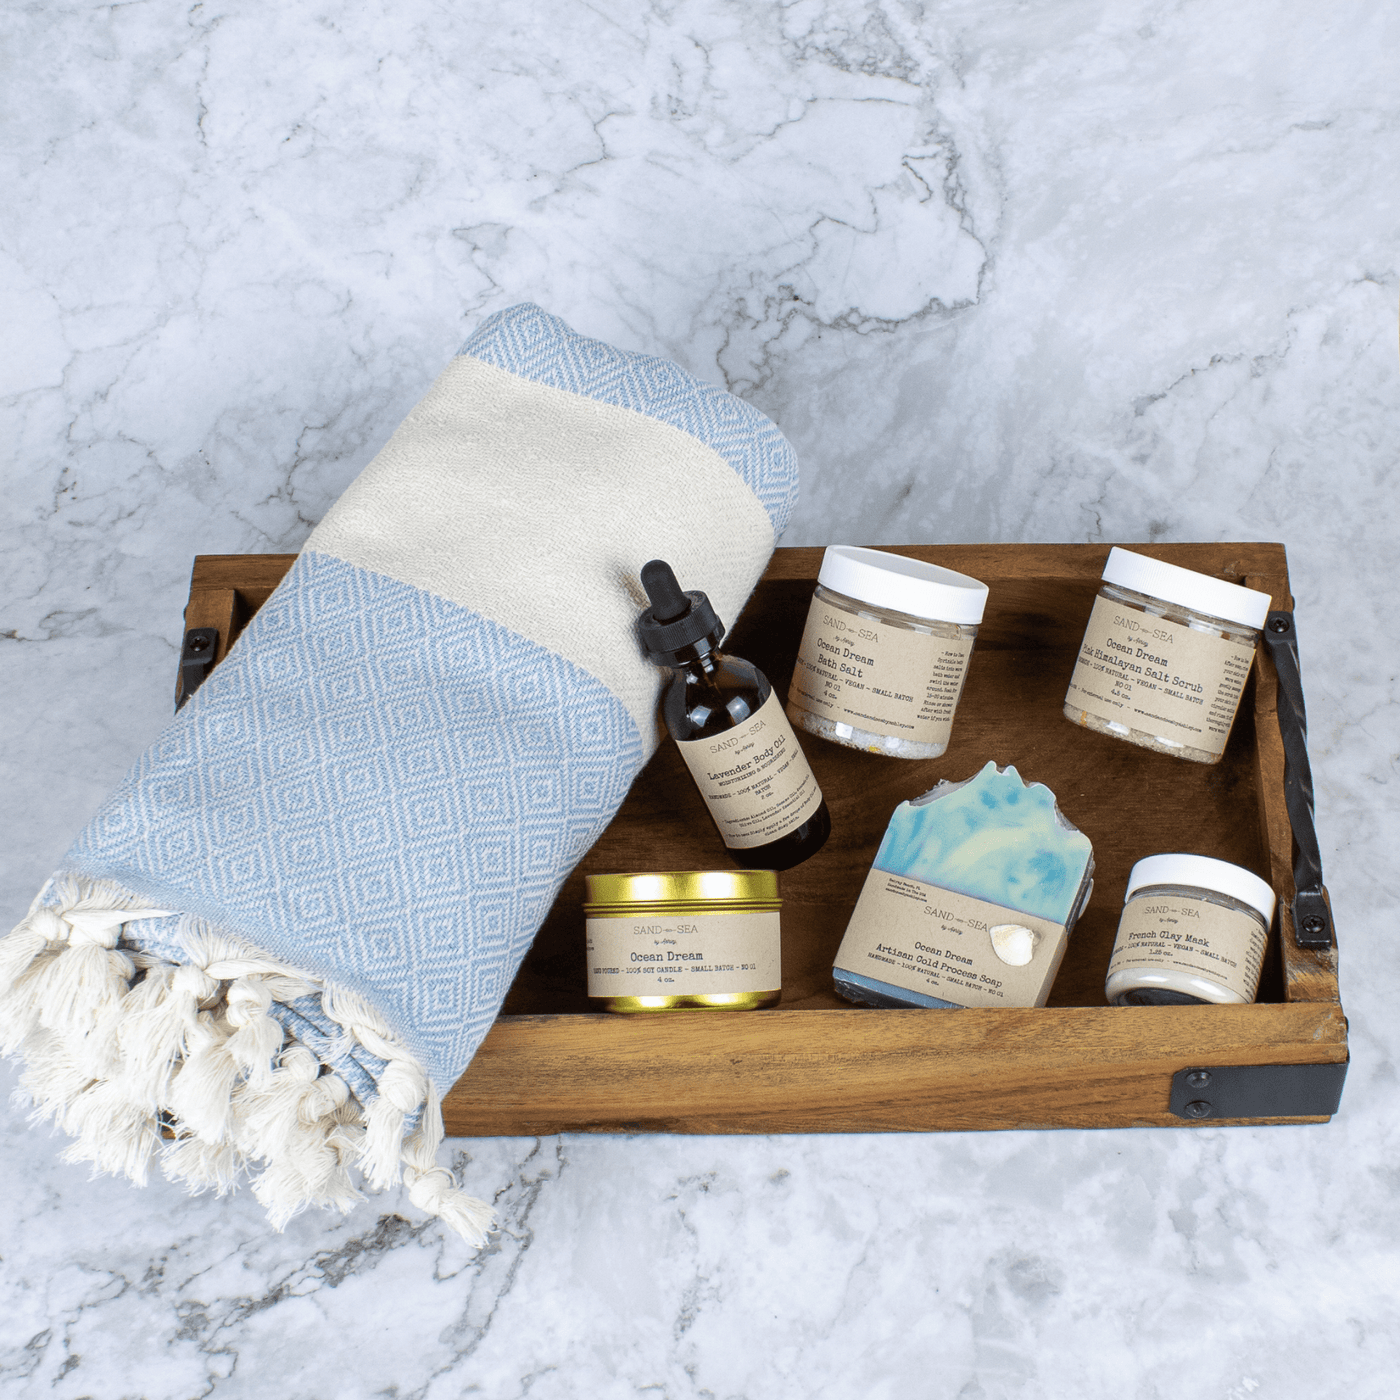 Happy Birthday Pampering Spa Gift Box for Her - Handmade Unique and Relaxing Stress Relief Spa Gift Baskets for Women Birthday - 13 pieces - Sand & Sea by Ashley